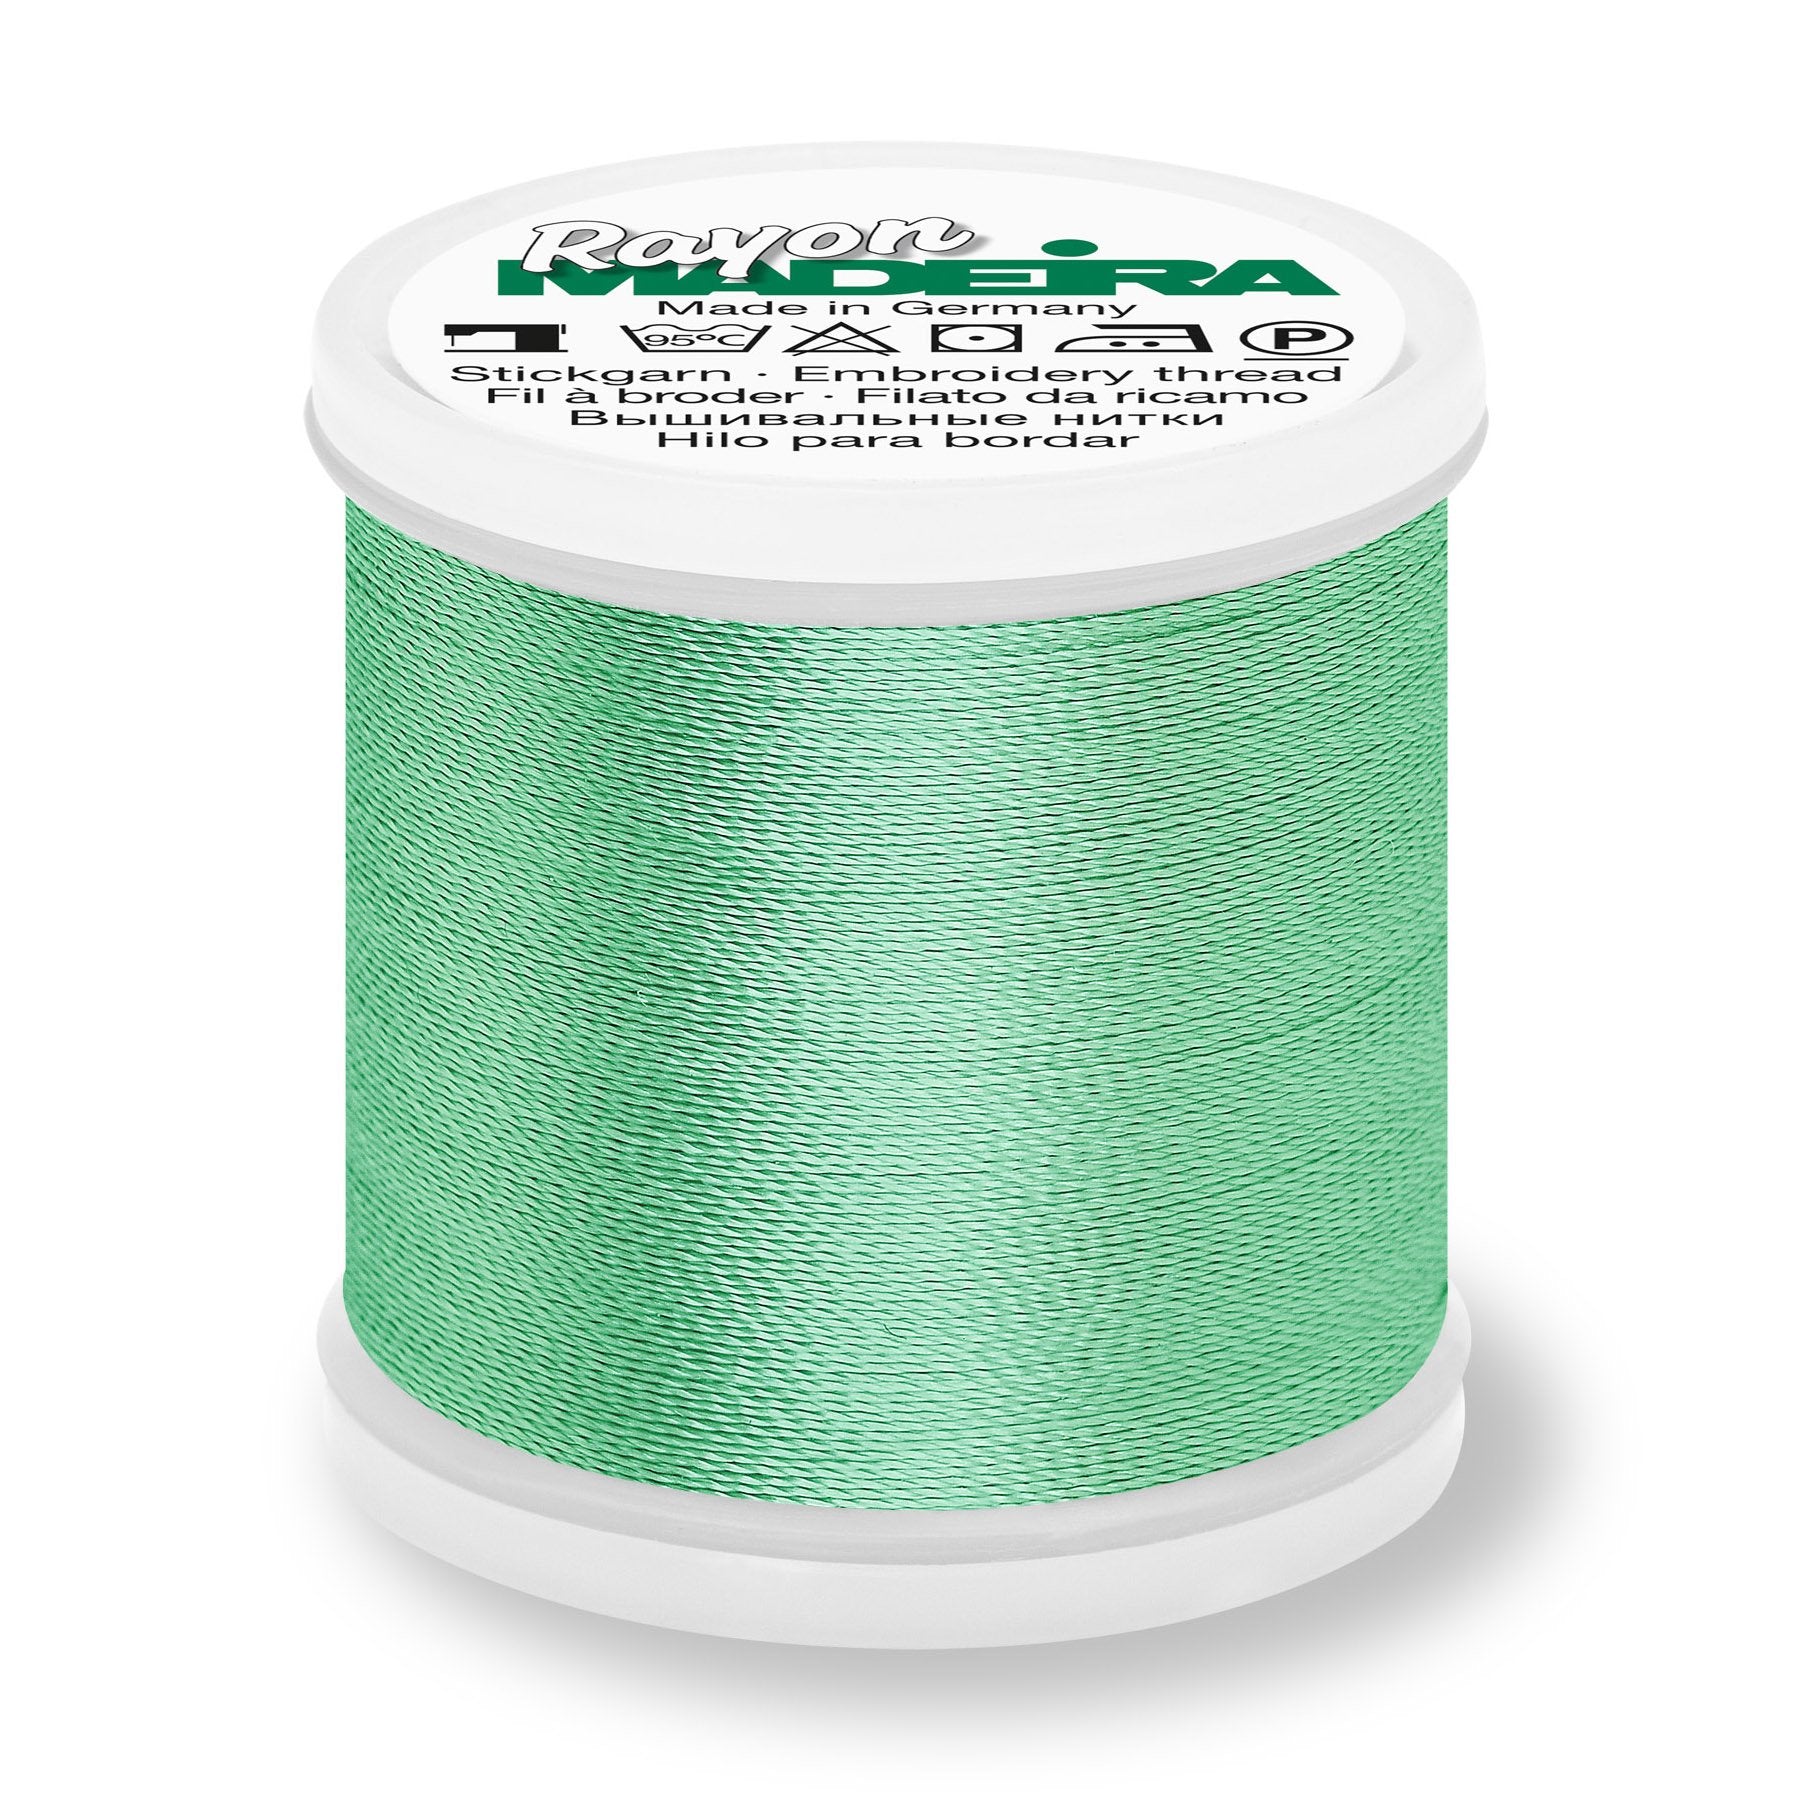 Madeira Rayon 40 Embroidery Thread 200m #1301 Deep Willow Green from Jaycotts Sewing Supplies